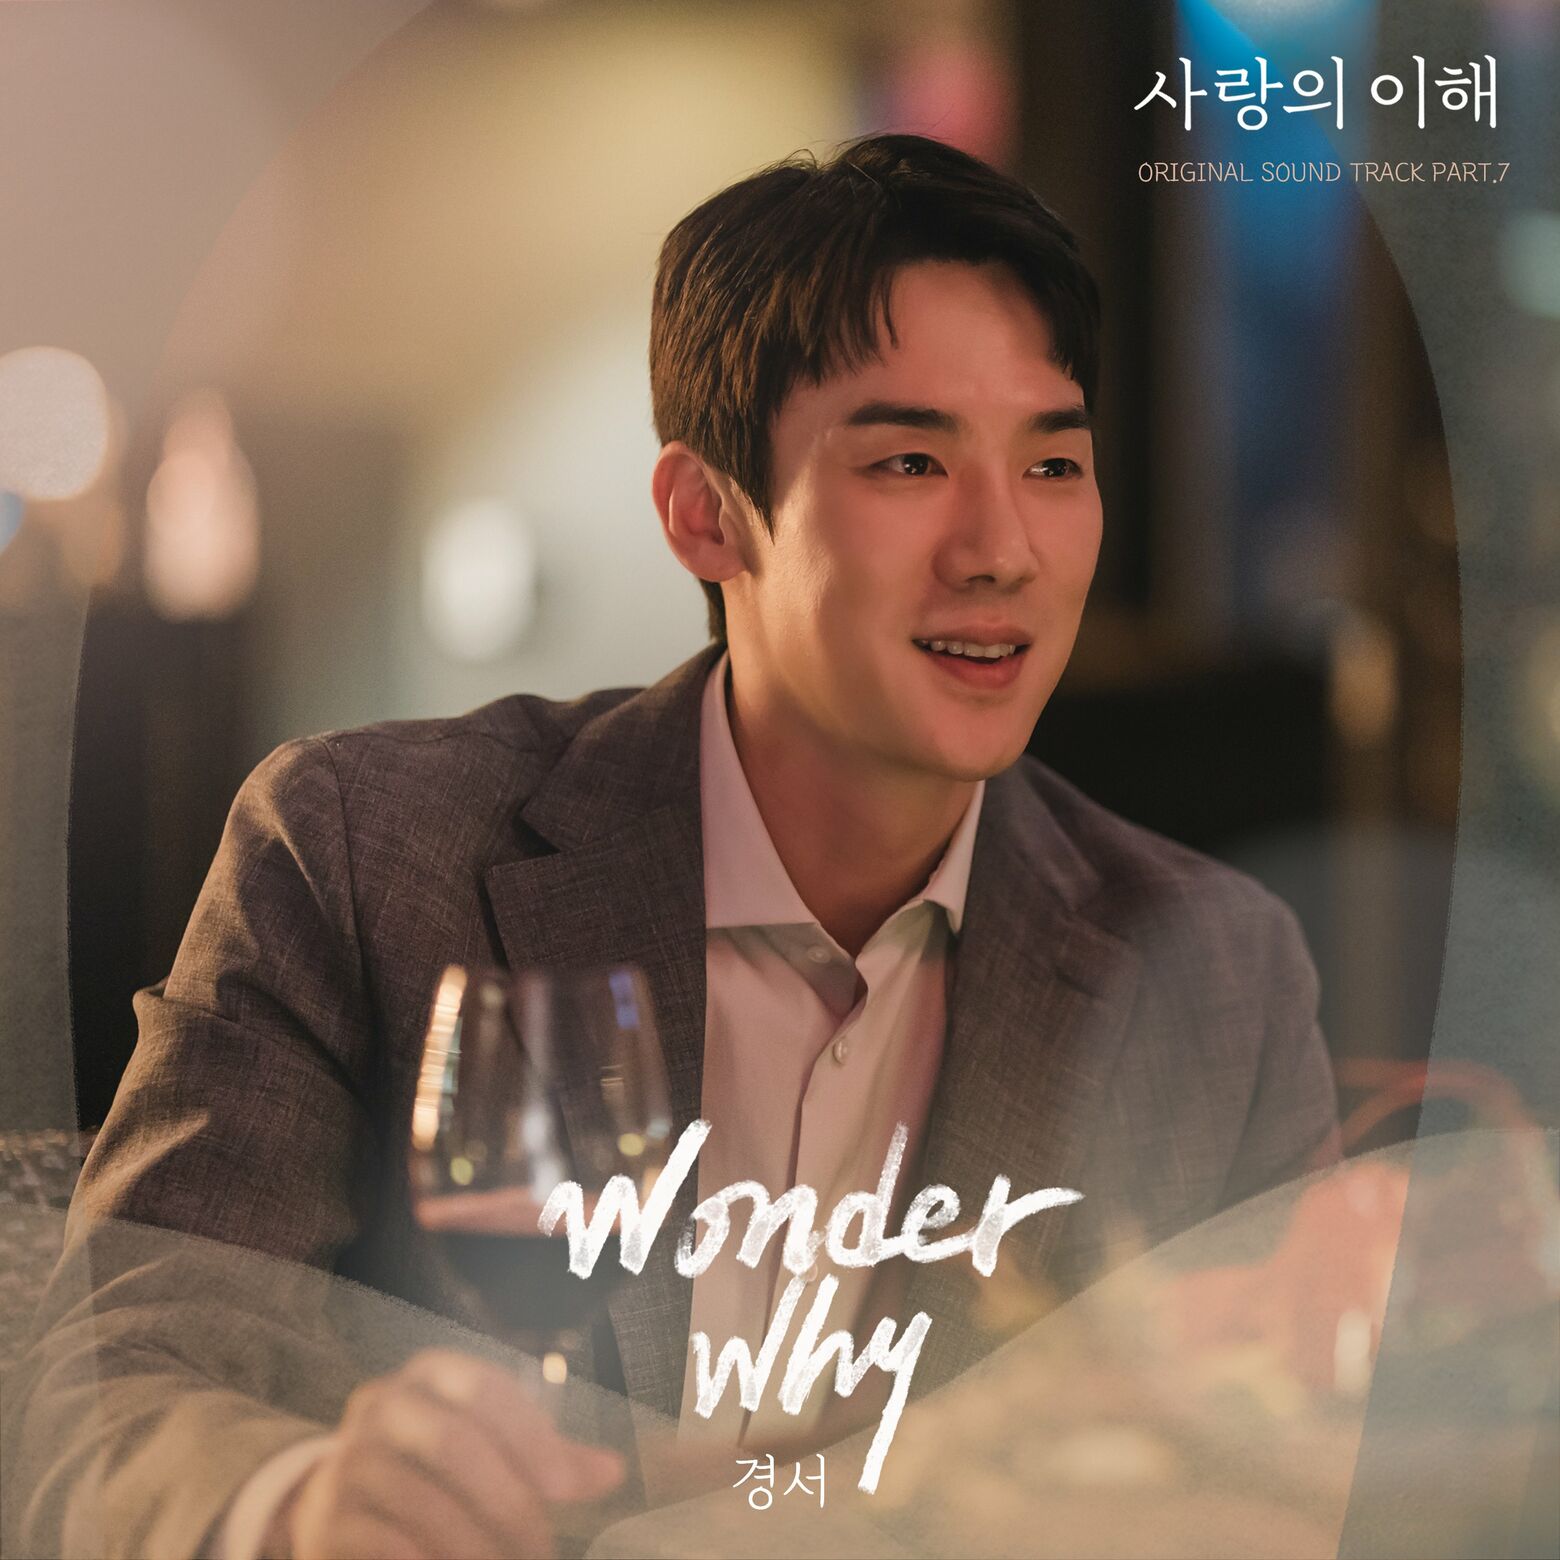 KyoungSeo – The Interest of Love (Original Television Soundtrack, Pt. 7)